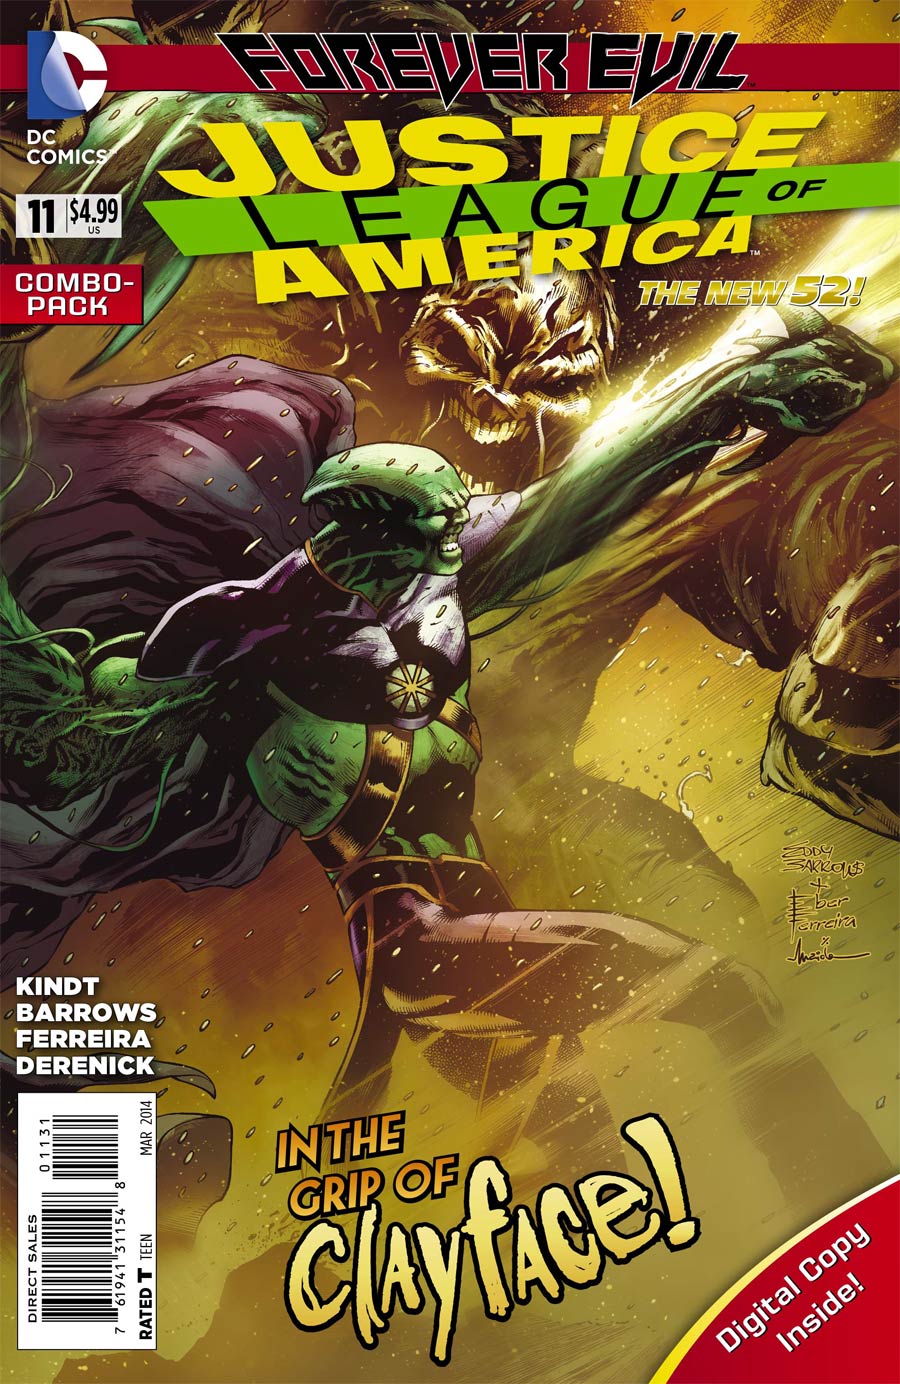 Justice League Of America Vol 3 #11 Cover D Combo Pack Without Polybag (Forever Evil Tie-In)